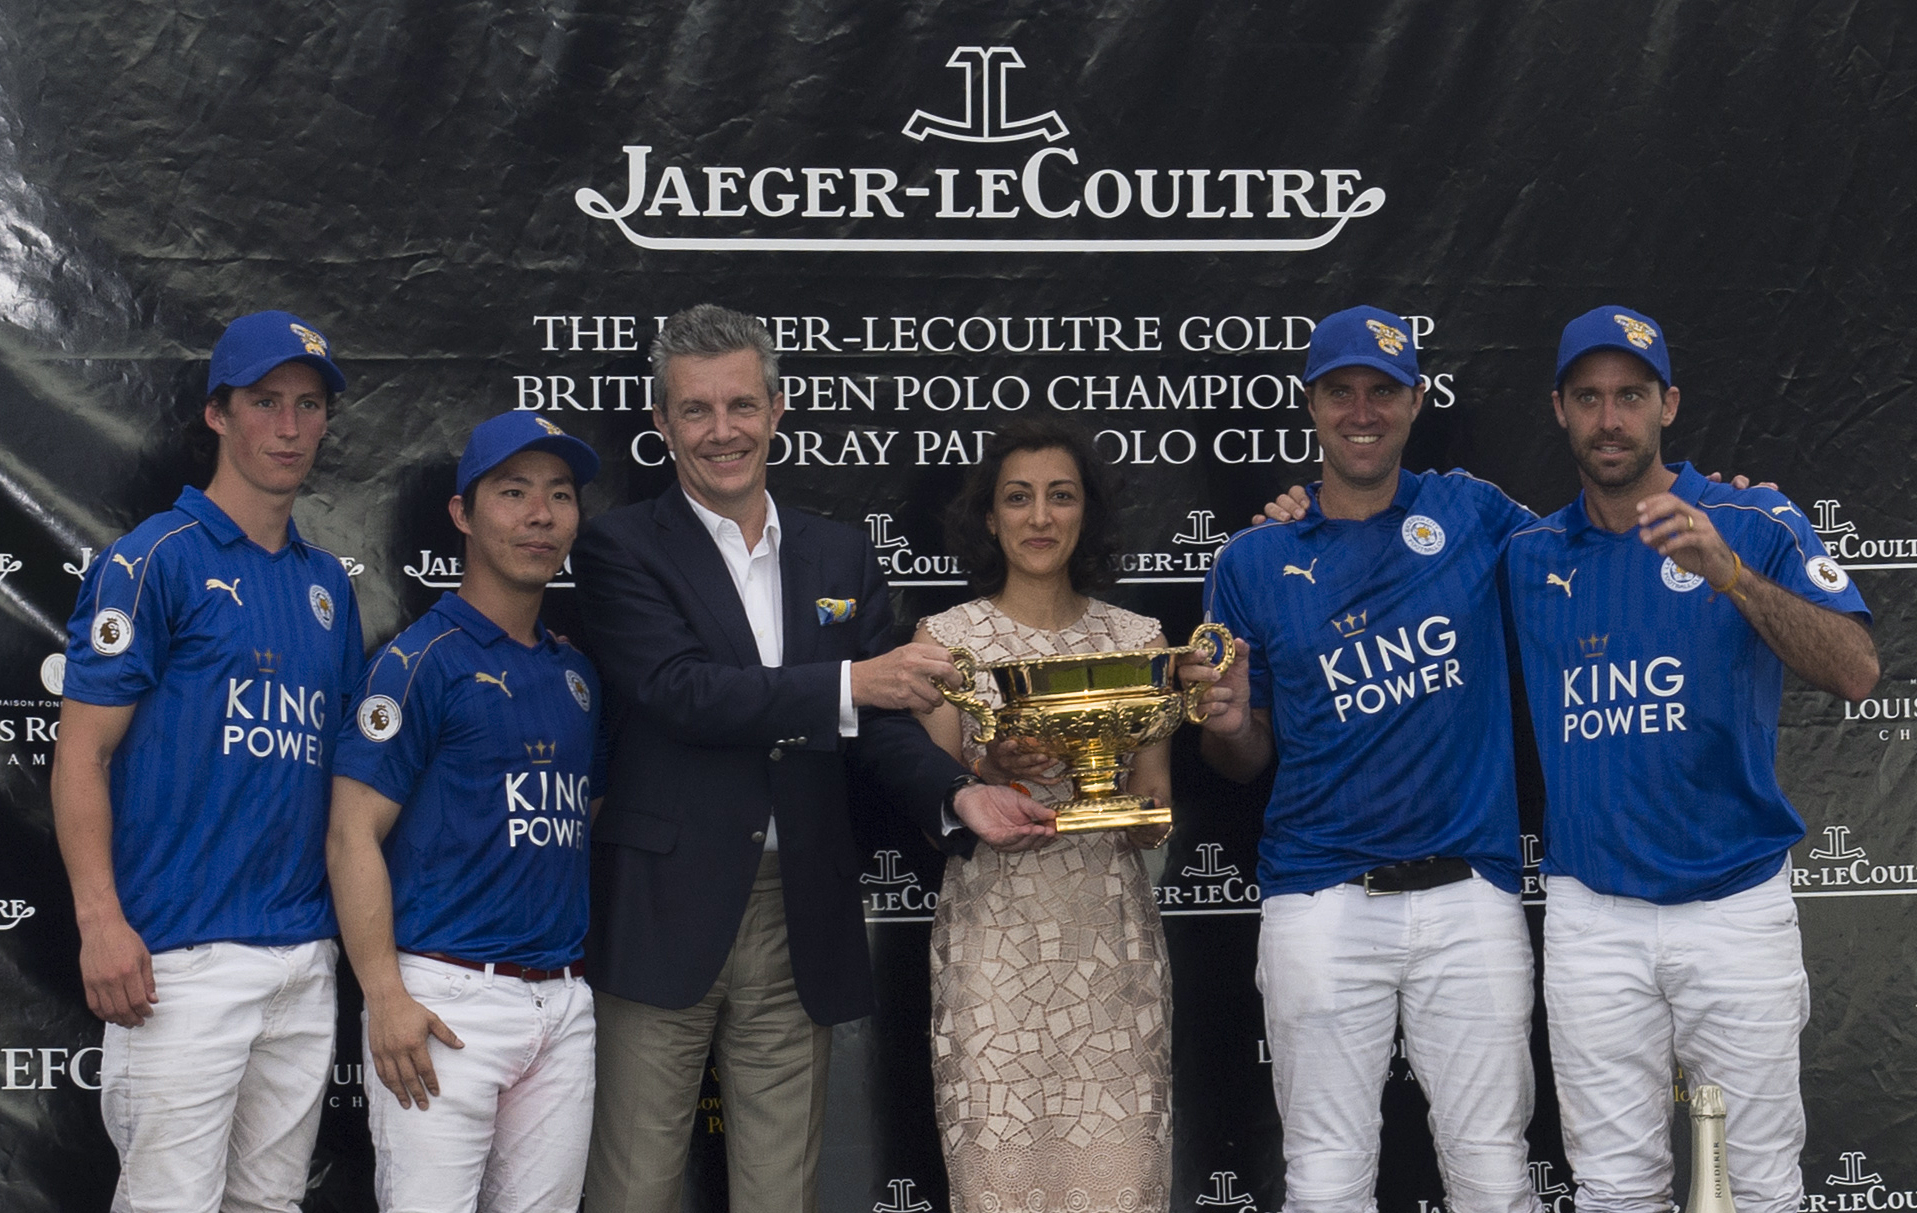 Jaeger lecoultre gold cup 4